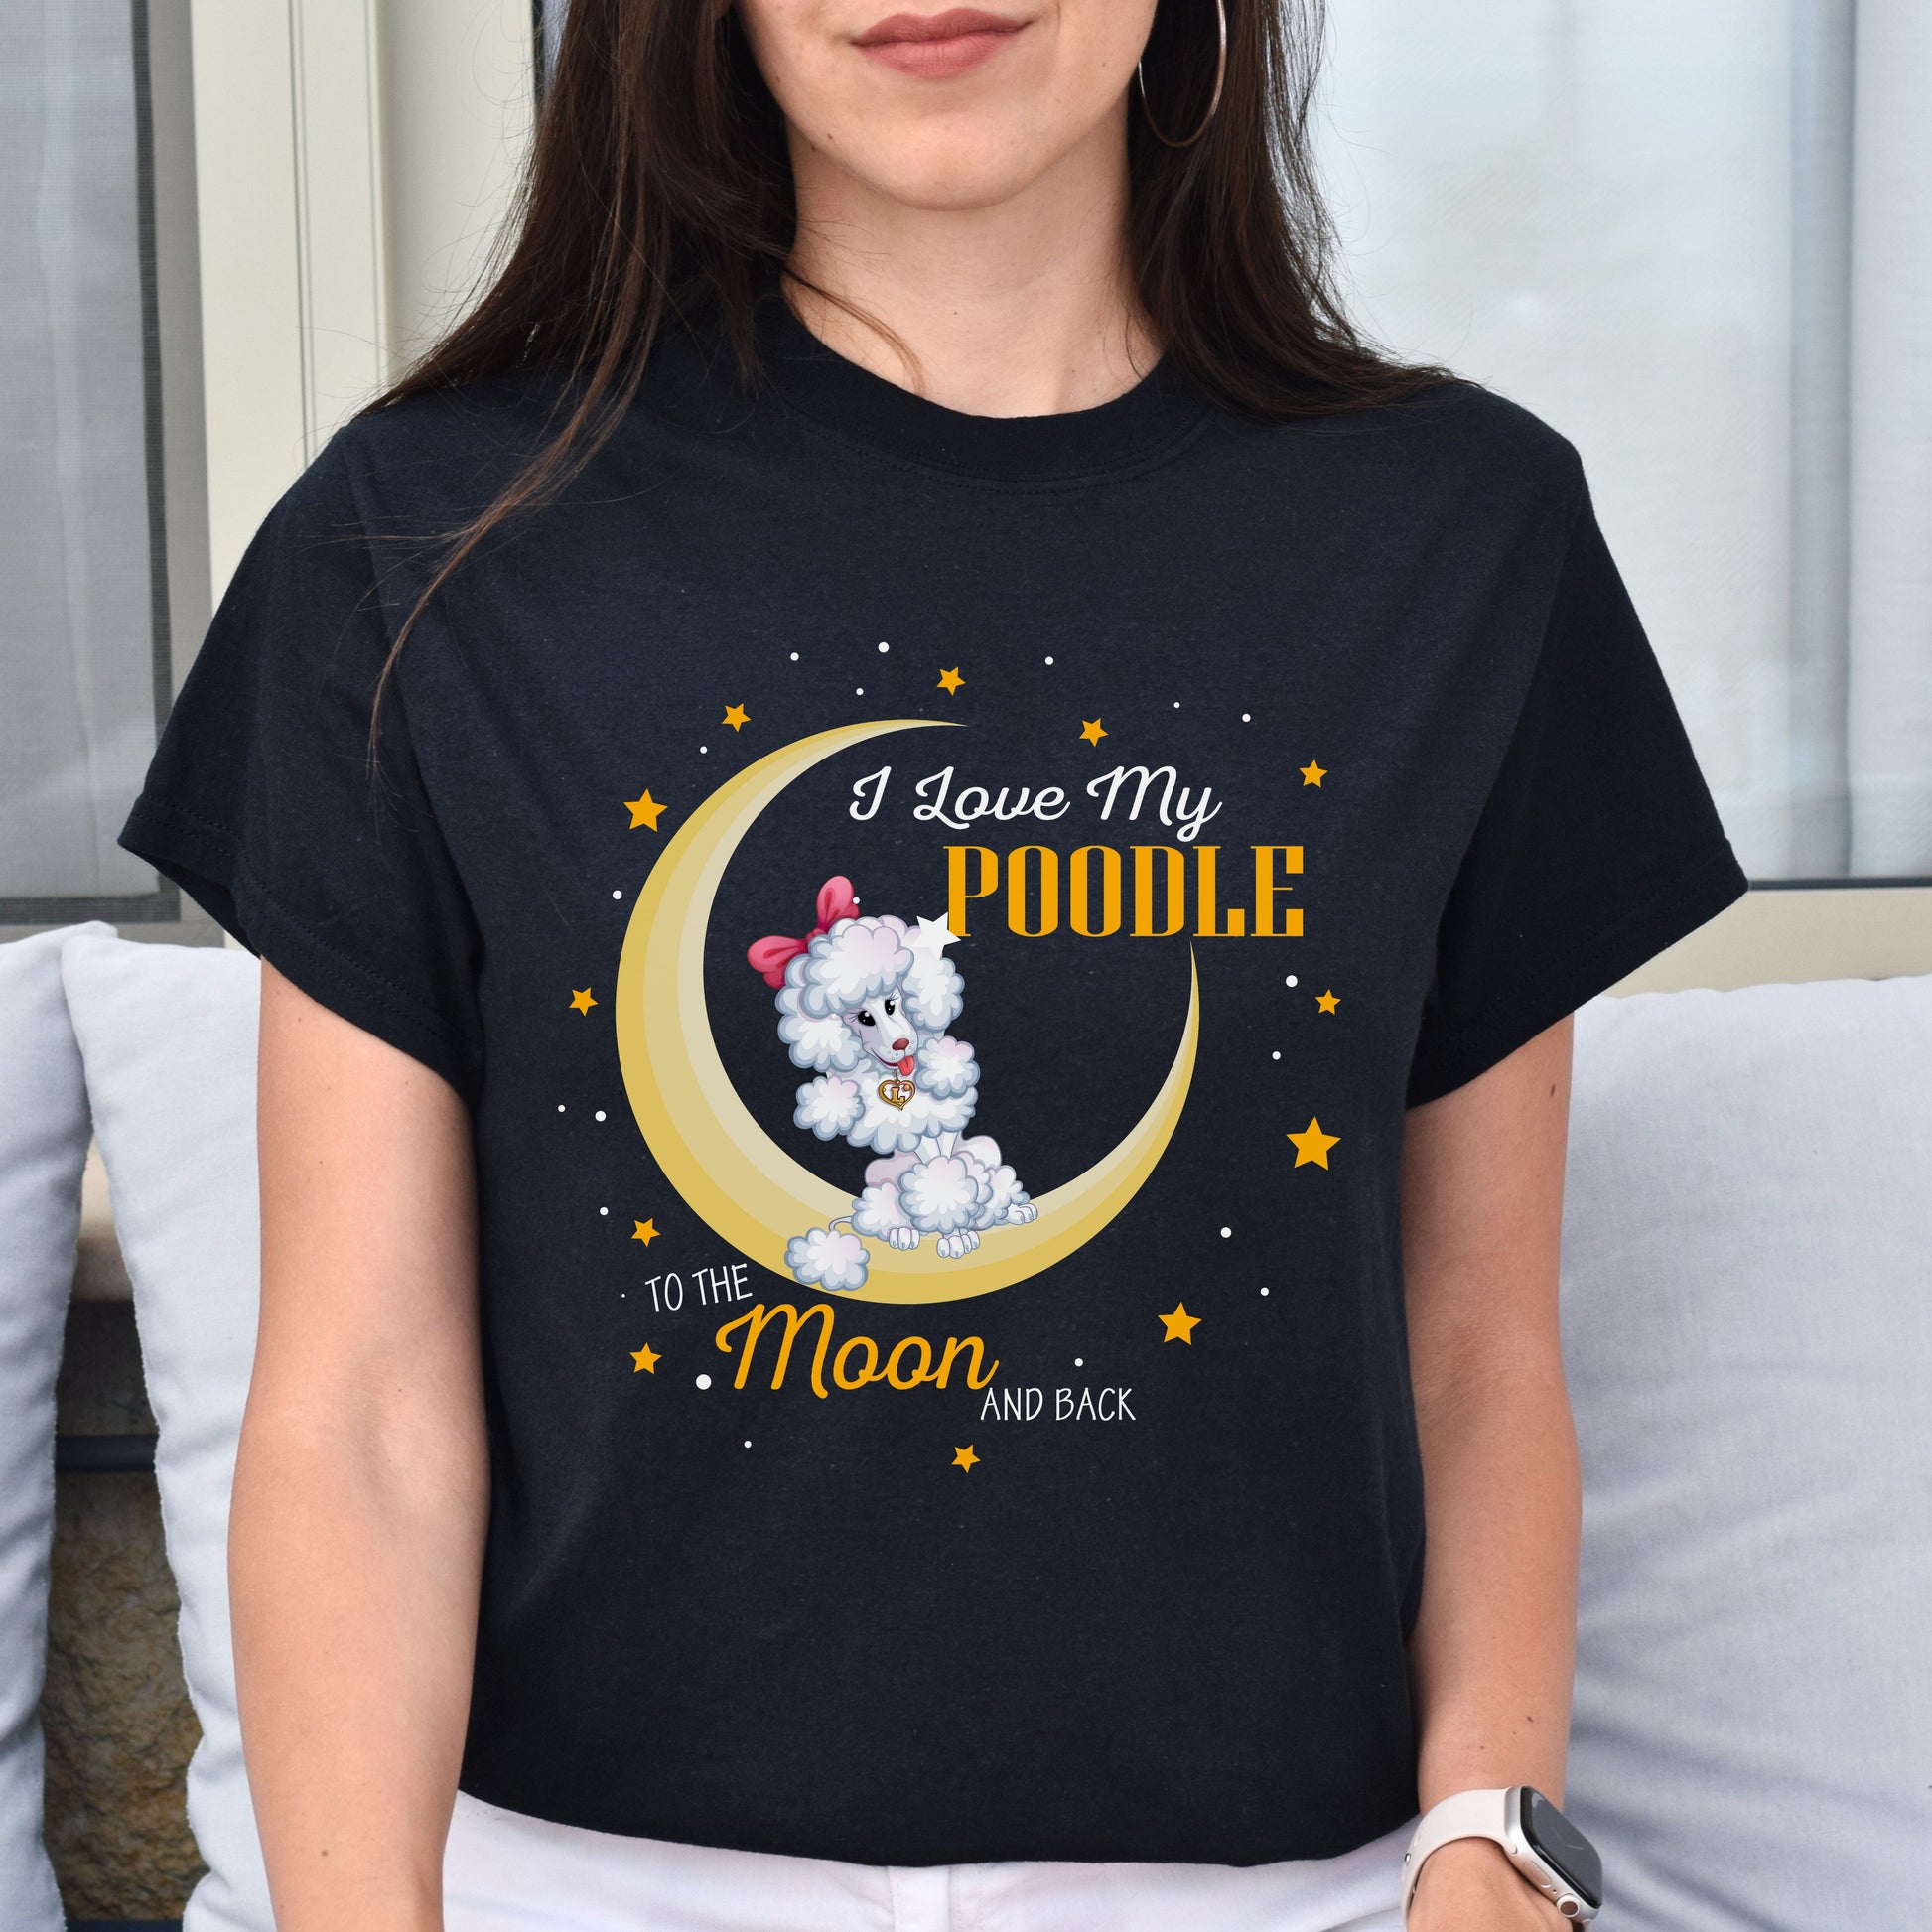 I love my poodle to the moon and back Unisex t-shirt gift black navy dark heather-Family-Gift-Planet